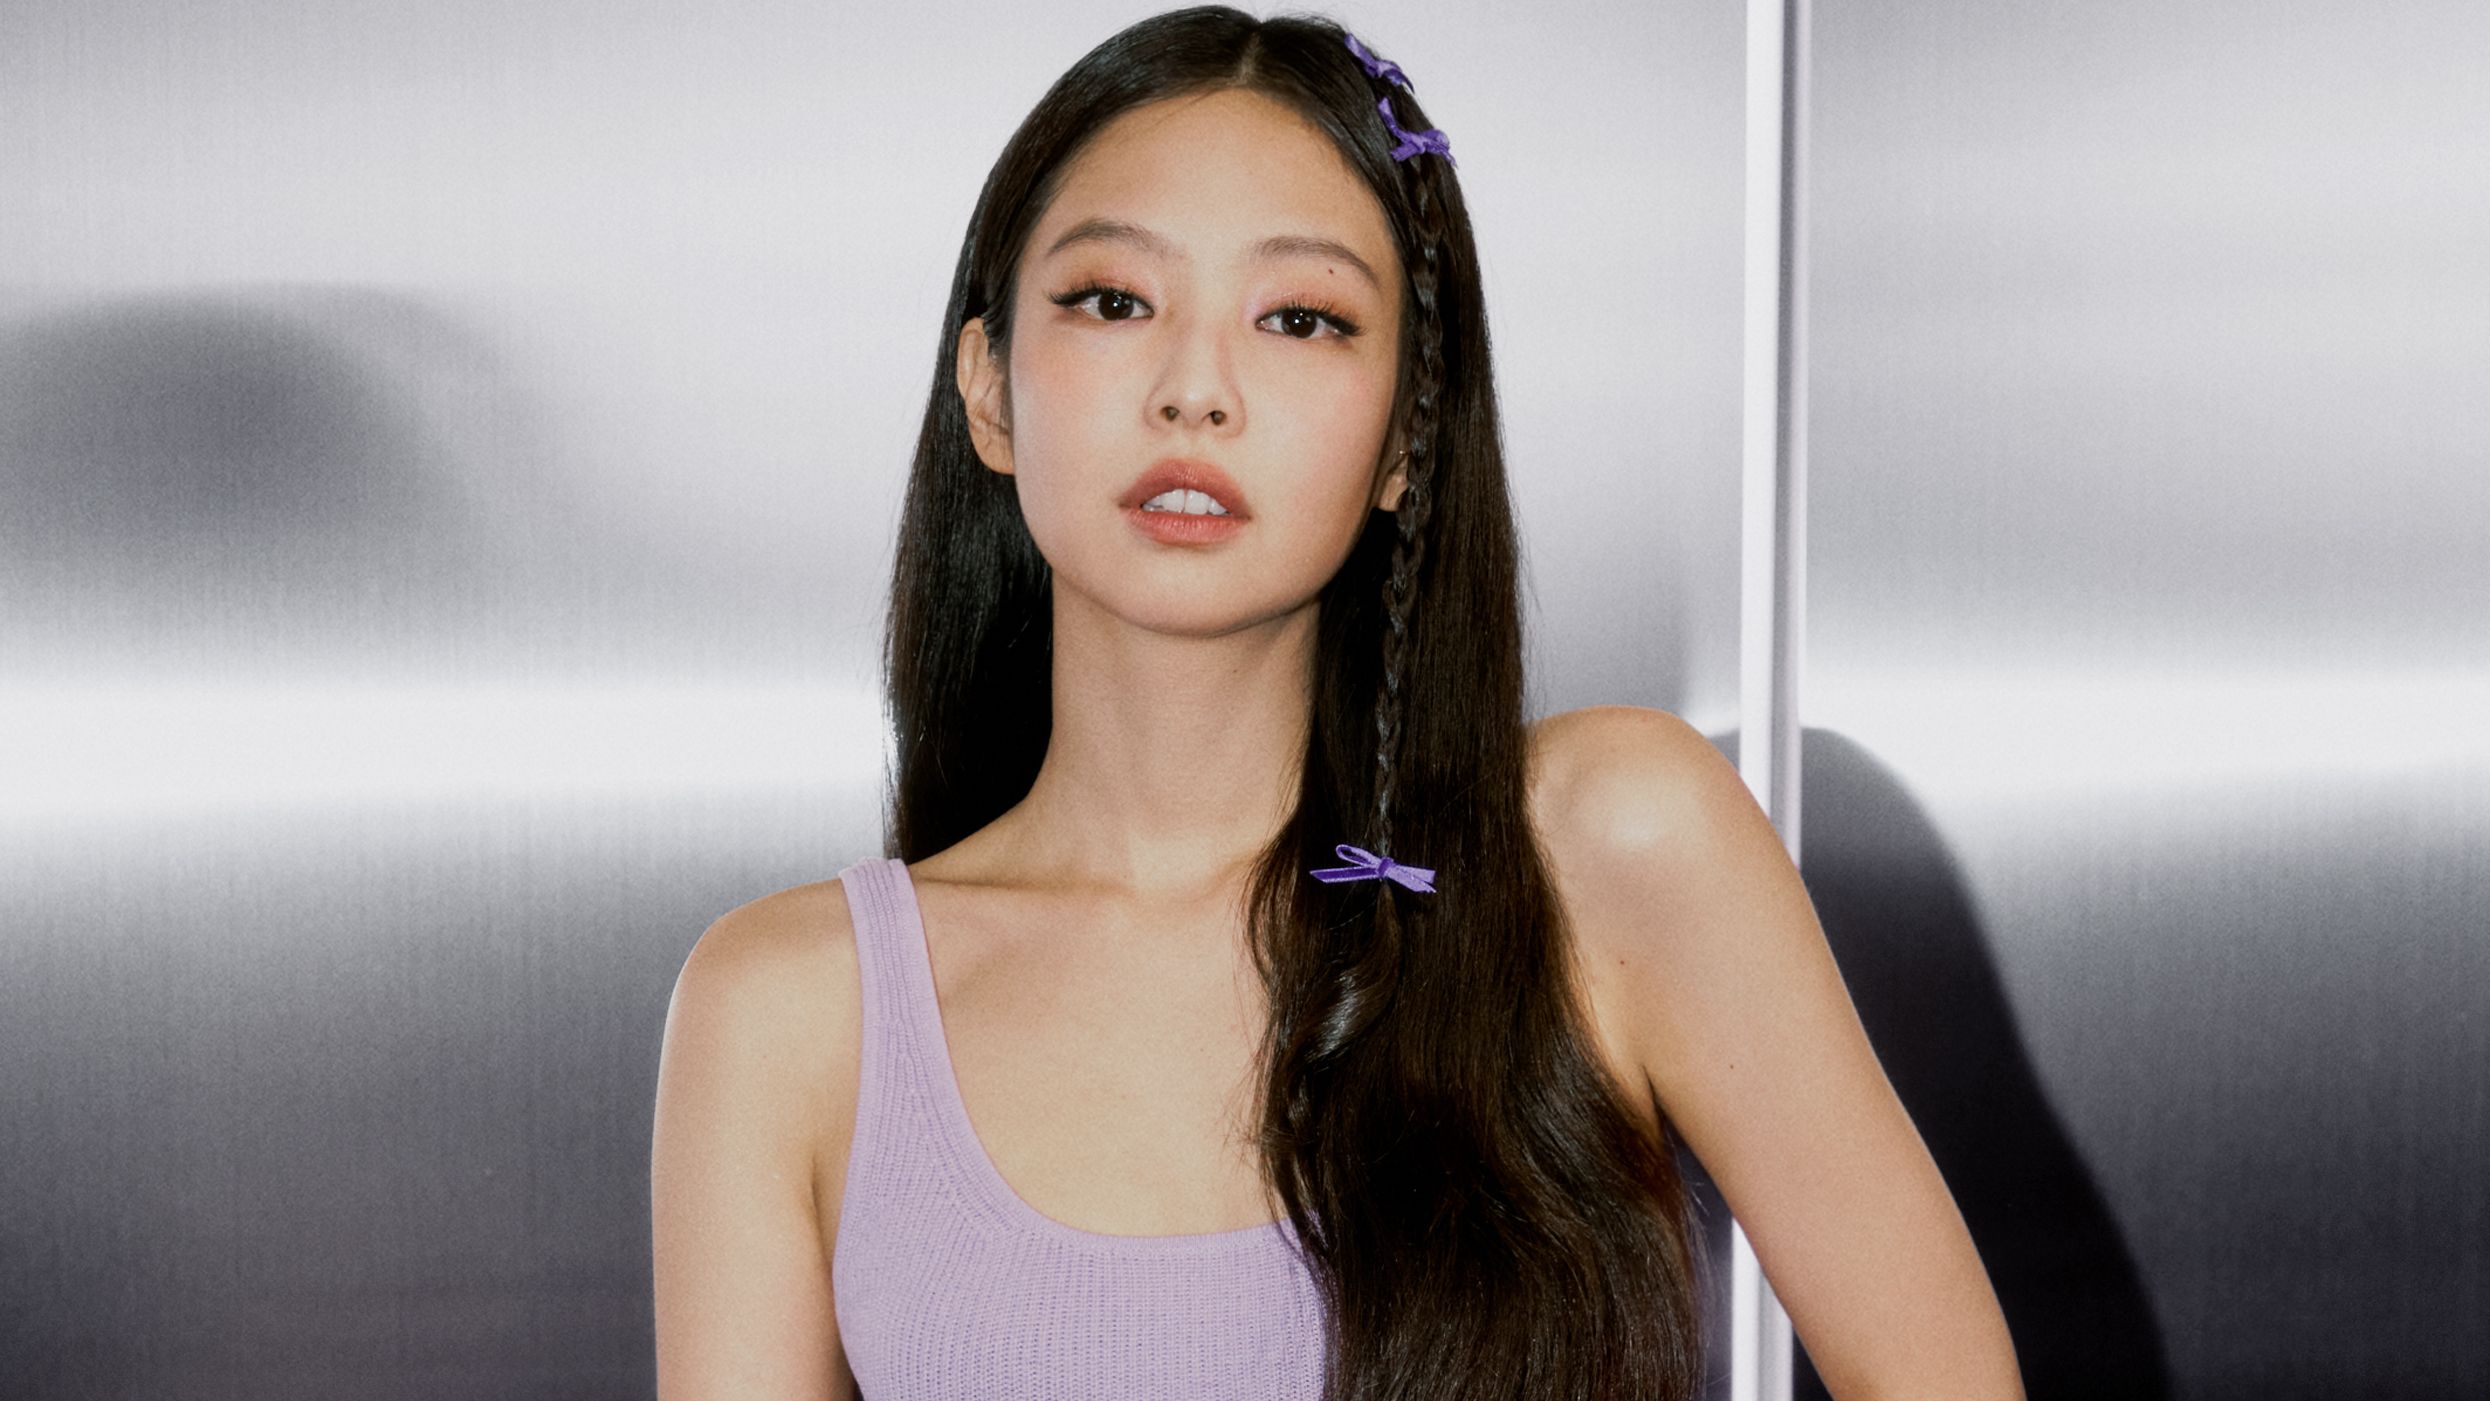 Dior CEO jokes 'If YG fires her, I'll take her' after running into  BLACKPINK's Jisoo and staff at Paris Fashion Week